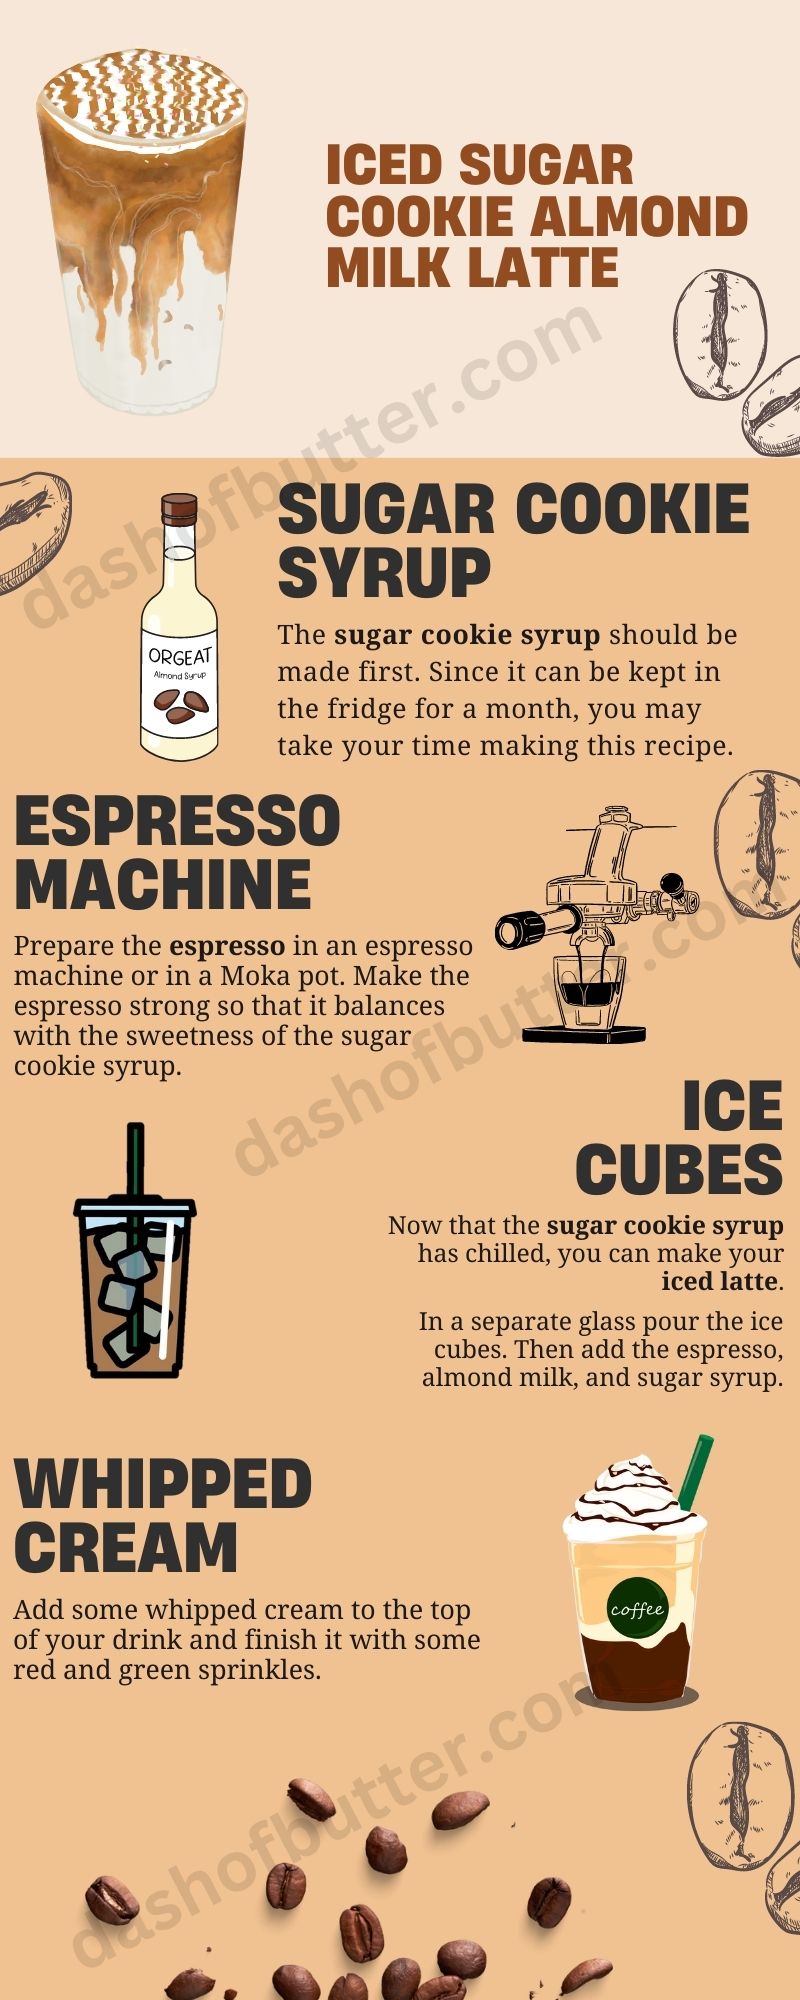 How to Make Iced Sugar Cookie Almond Milk Latte?